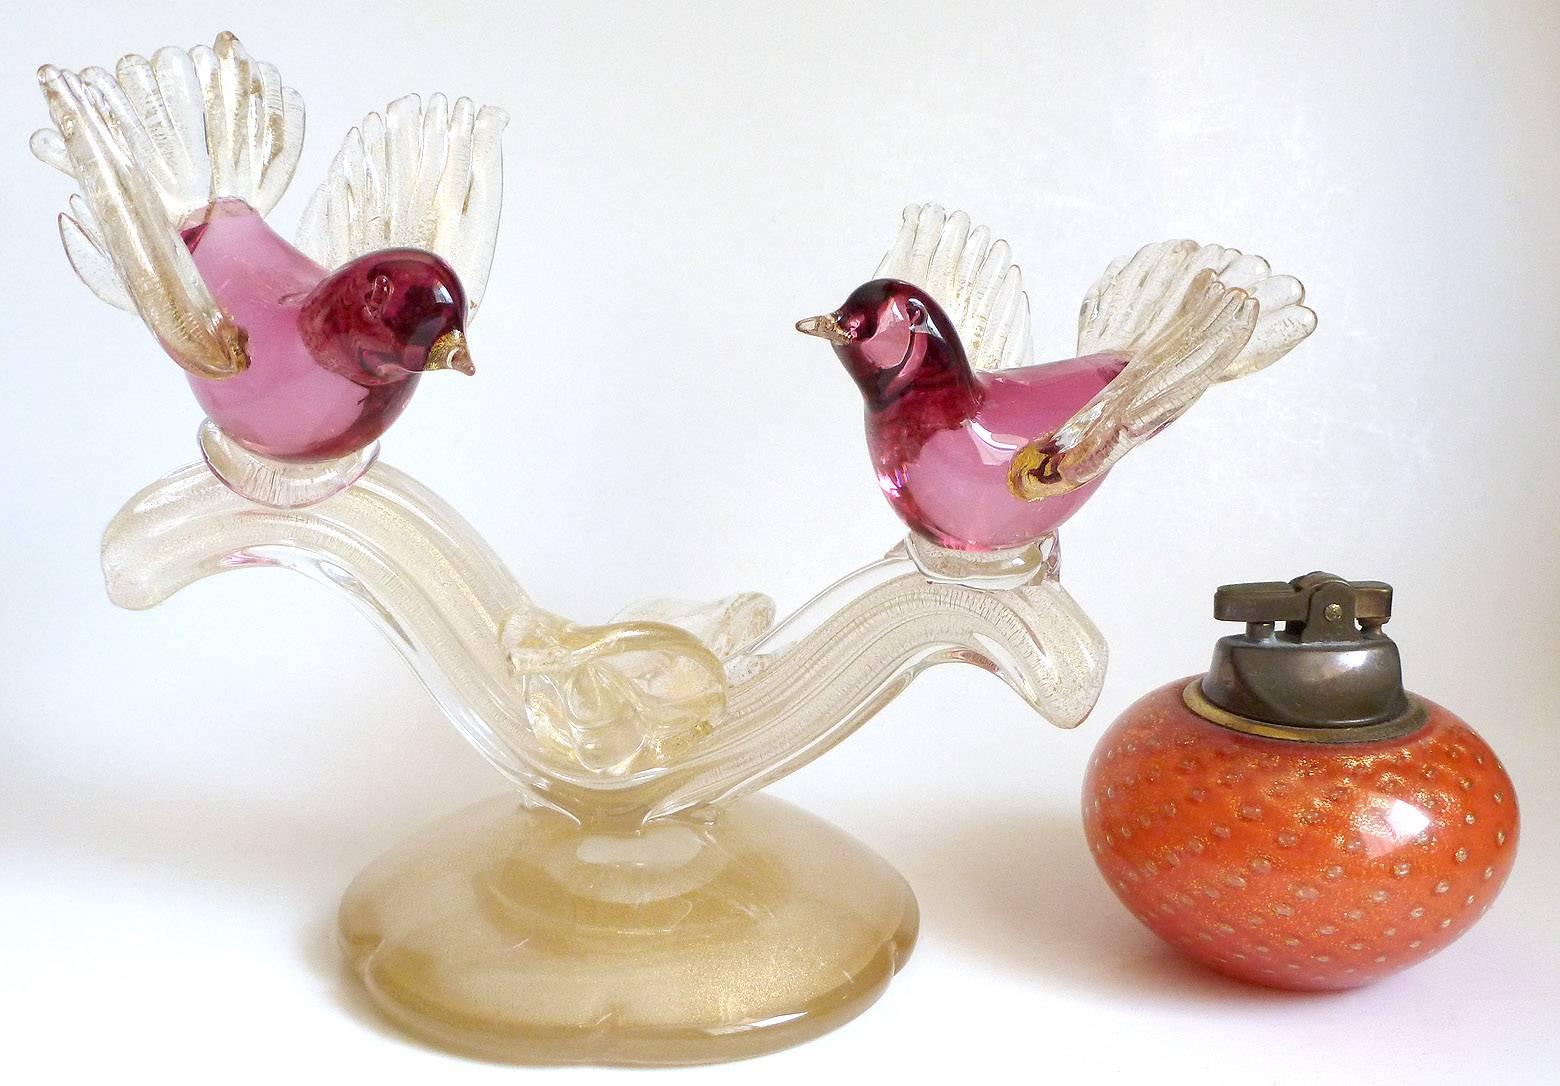 Beautiful Murano hand blown cranberry pink and gold flecks Italian art glass birds on branch sculpture. Documented as a Alfredo Barbini piece, circa 1950s, and published in his Weil Ceramics and Glass catalog. Profusely covered in gold leaf